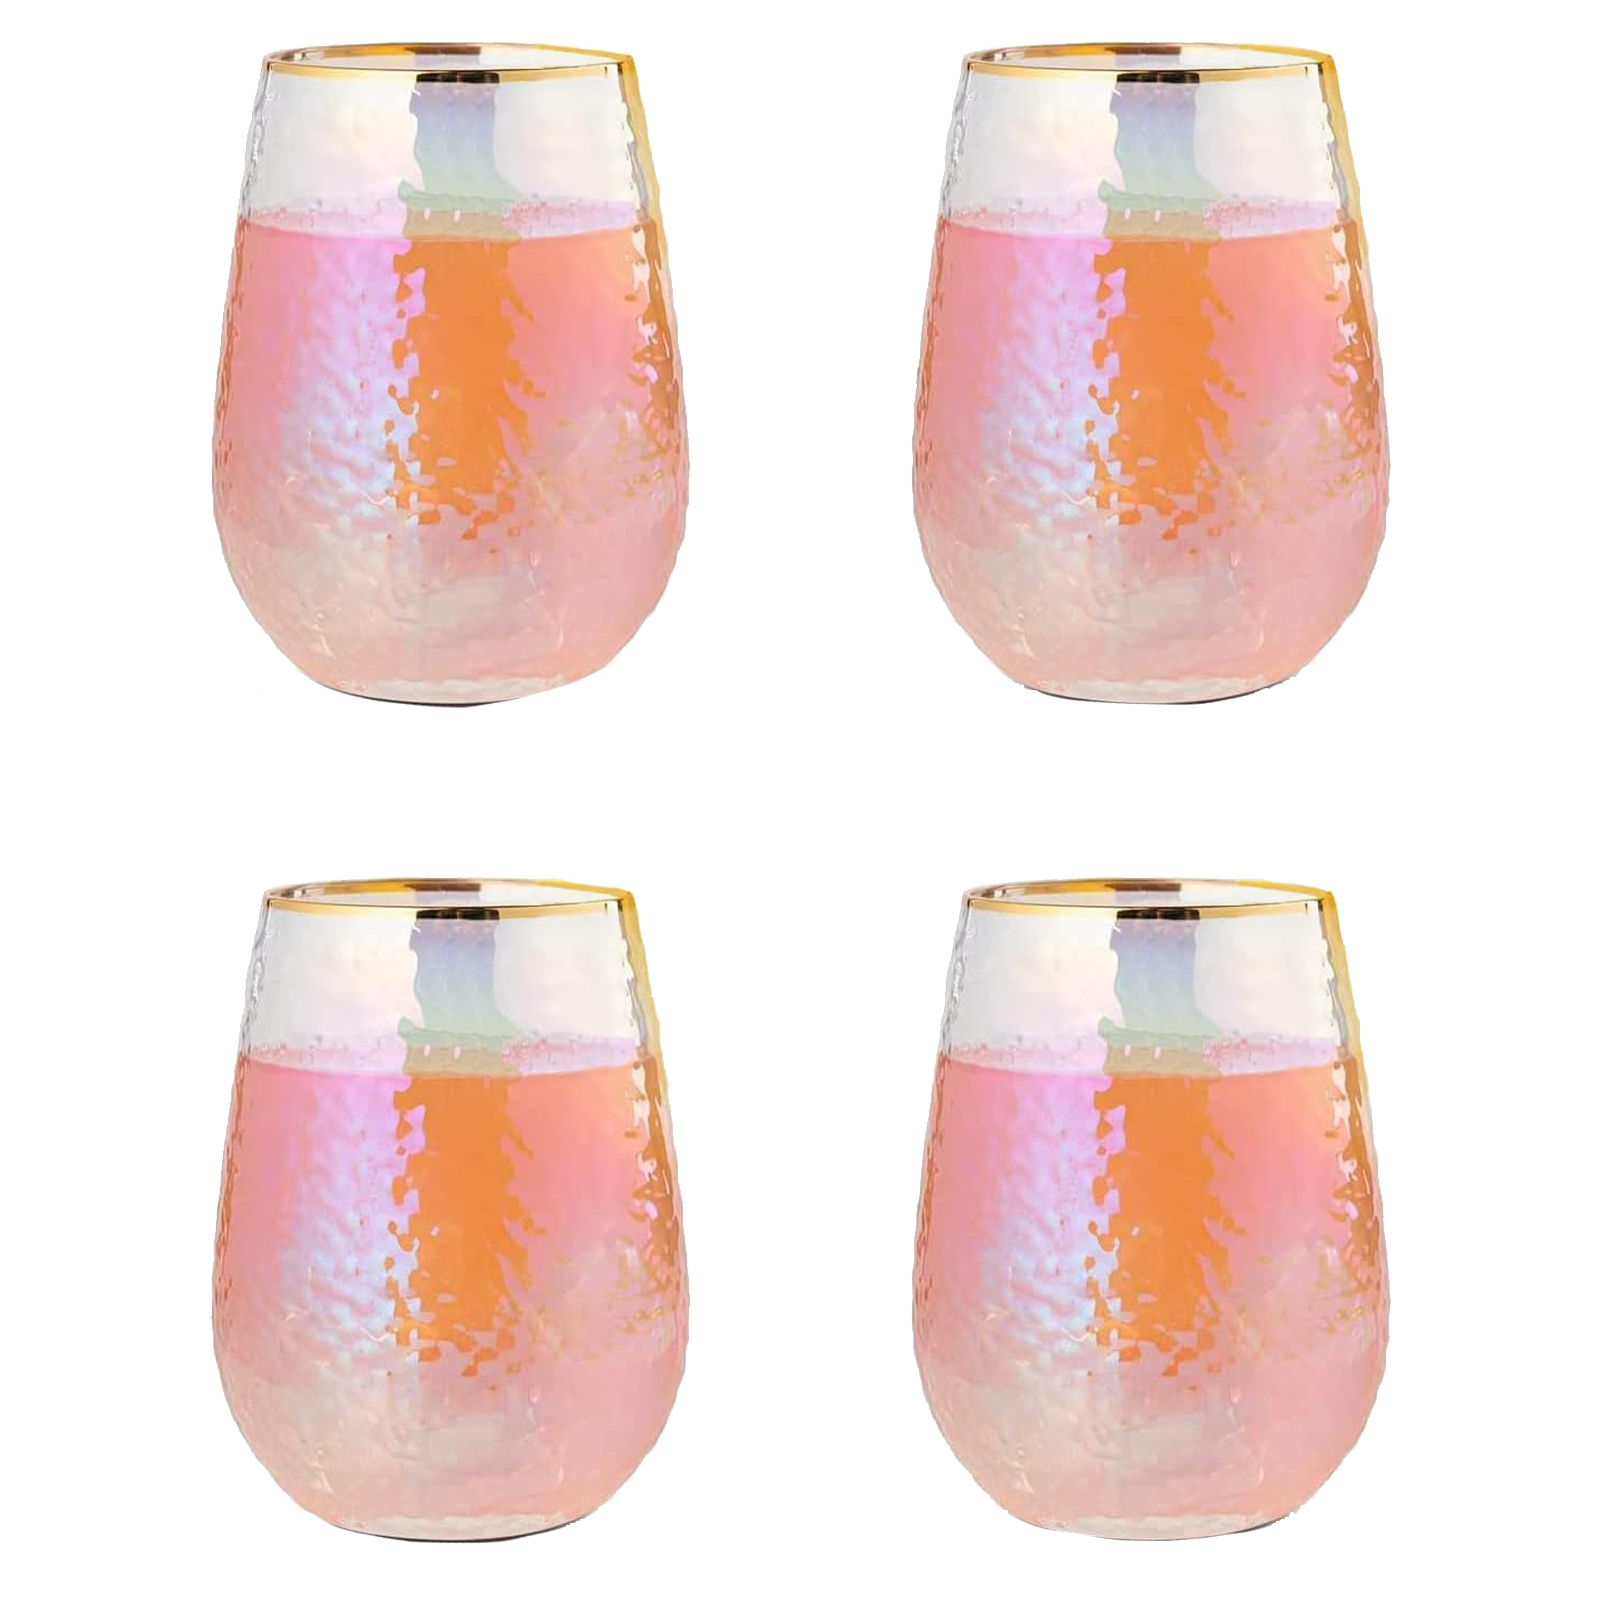 Festive Lustered Iridescent Stemless Wine & Water Glasses - Set of 4-100% Glass 15oz Mouthblown Colorful Glasses - Anniversaries, Birthday Gift, Cocktail Party Radiance - Water, Whiskey, Juice, Gift-1